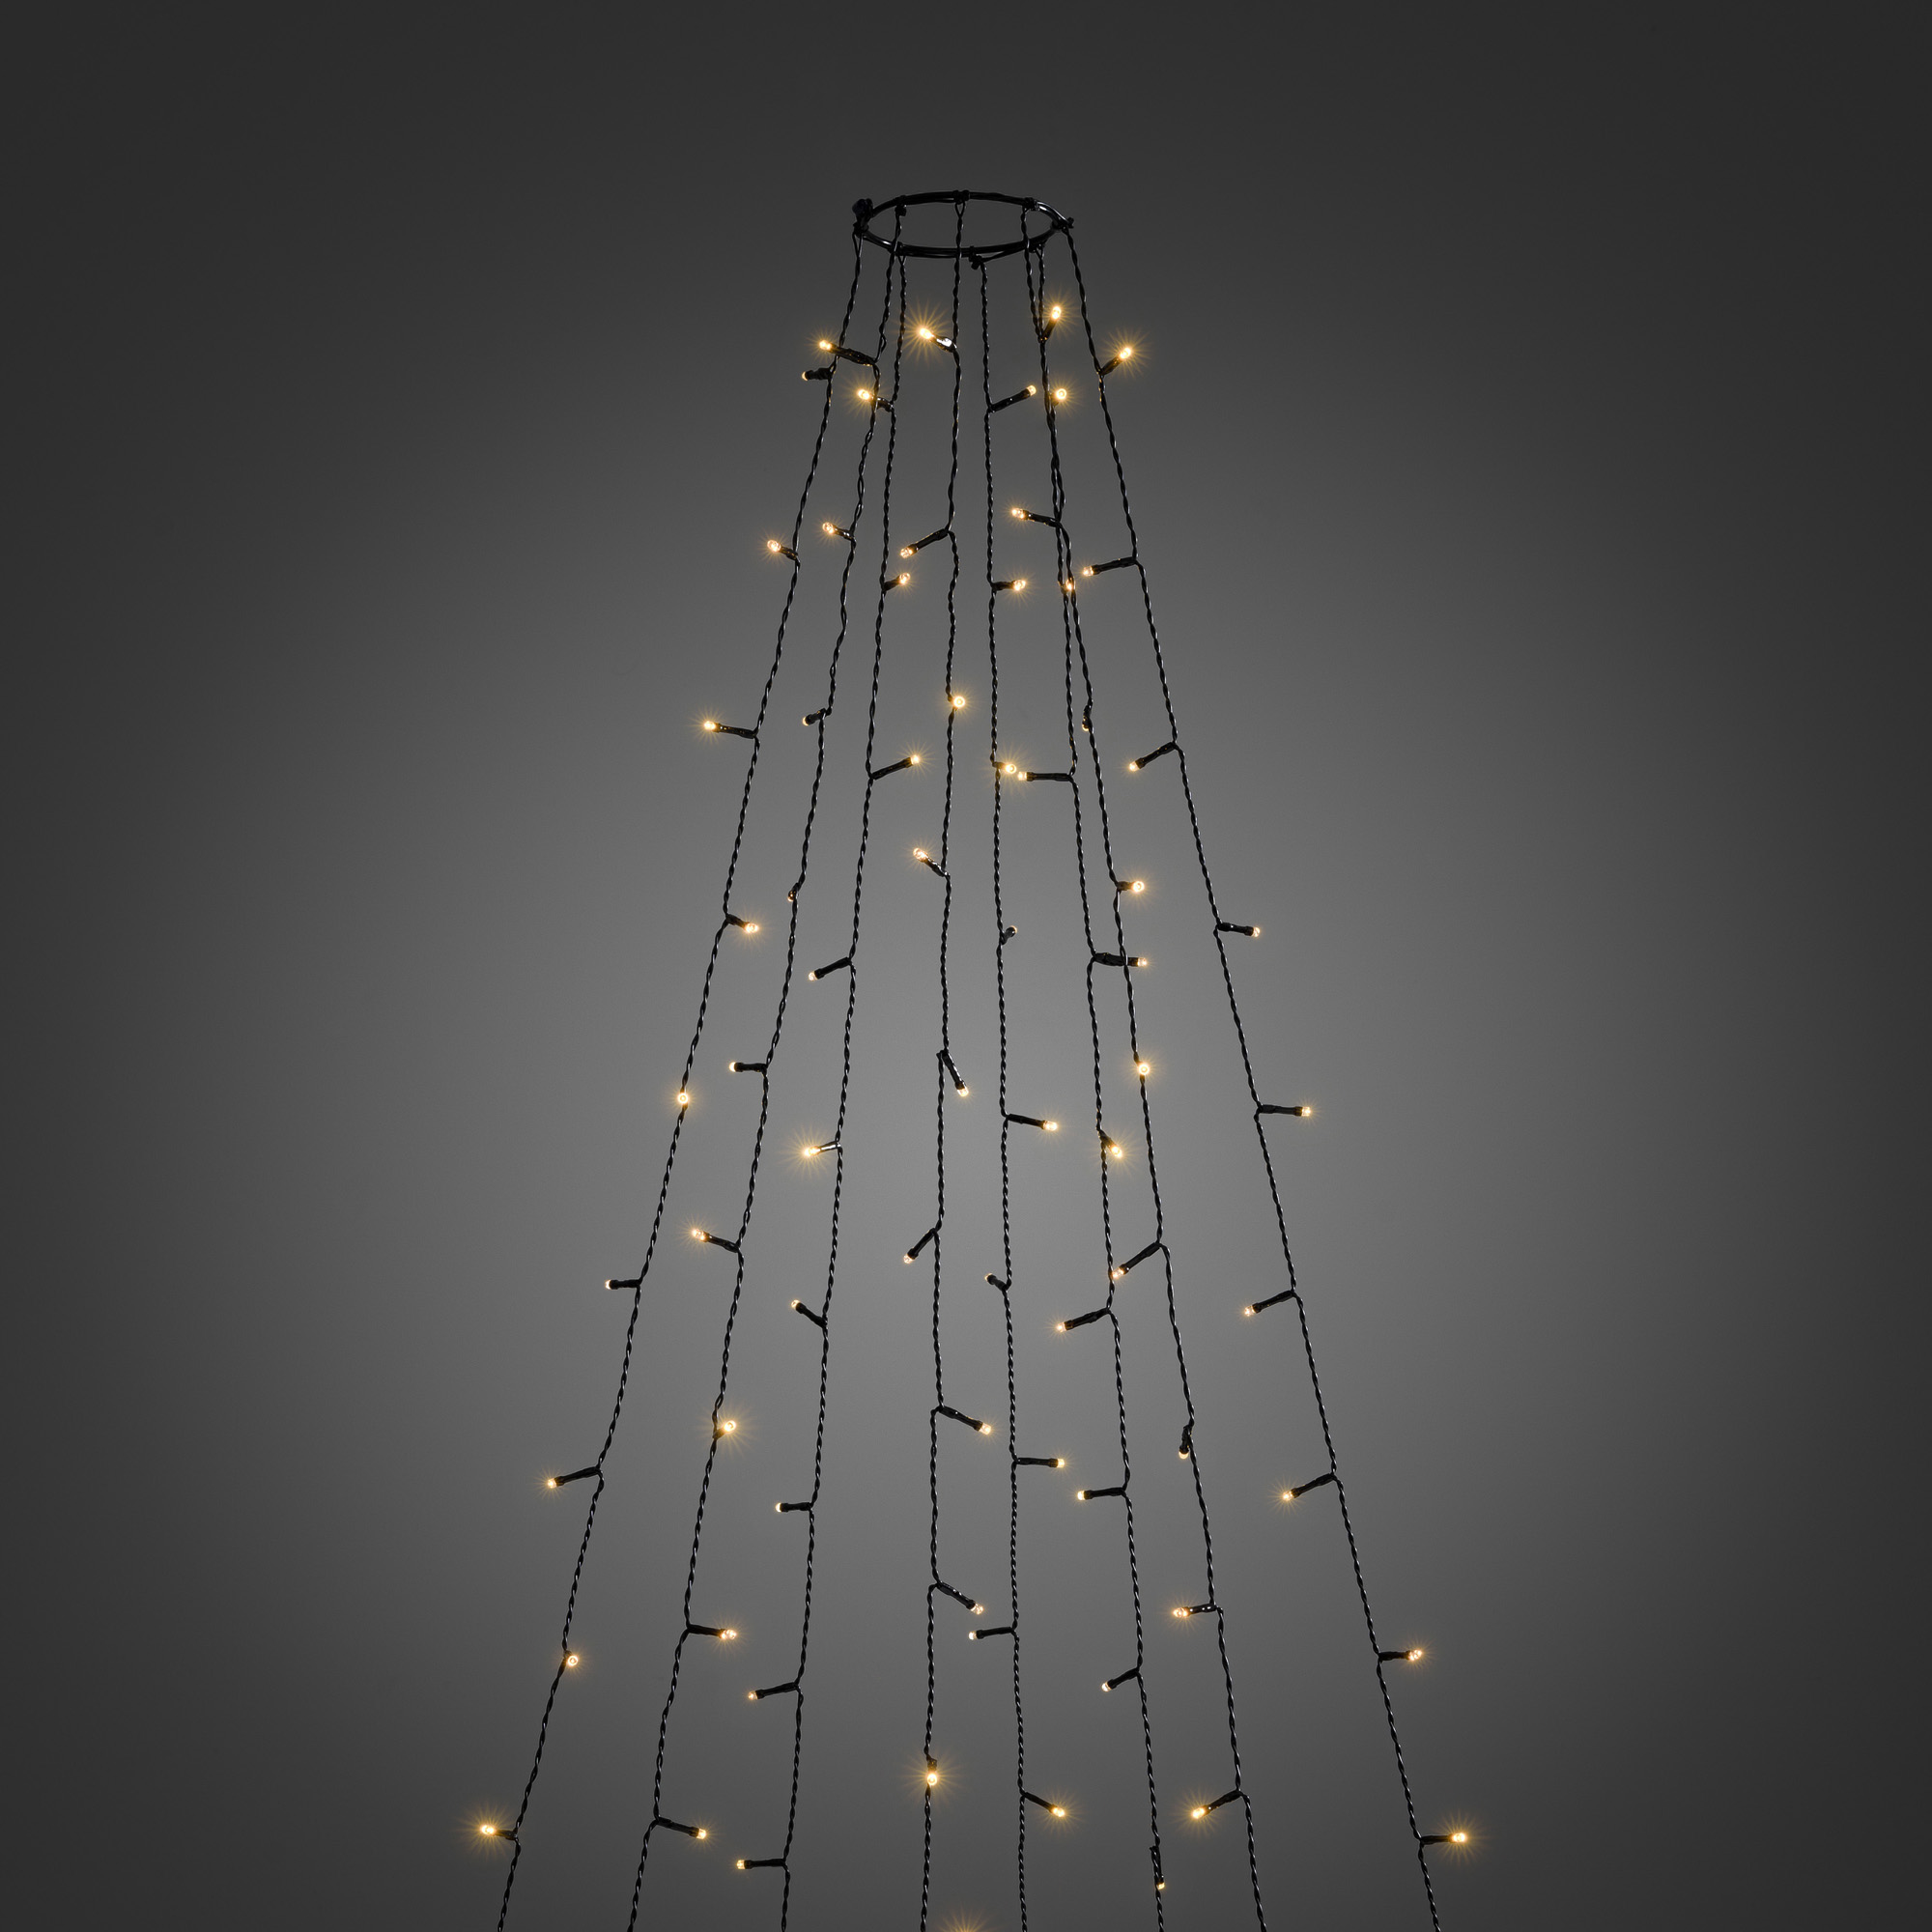 LED Tree Coat amber, 8 strings of 4m (50 LEDs each), with multifunction, app-controlled